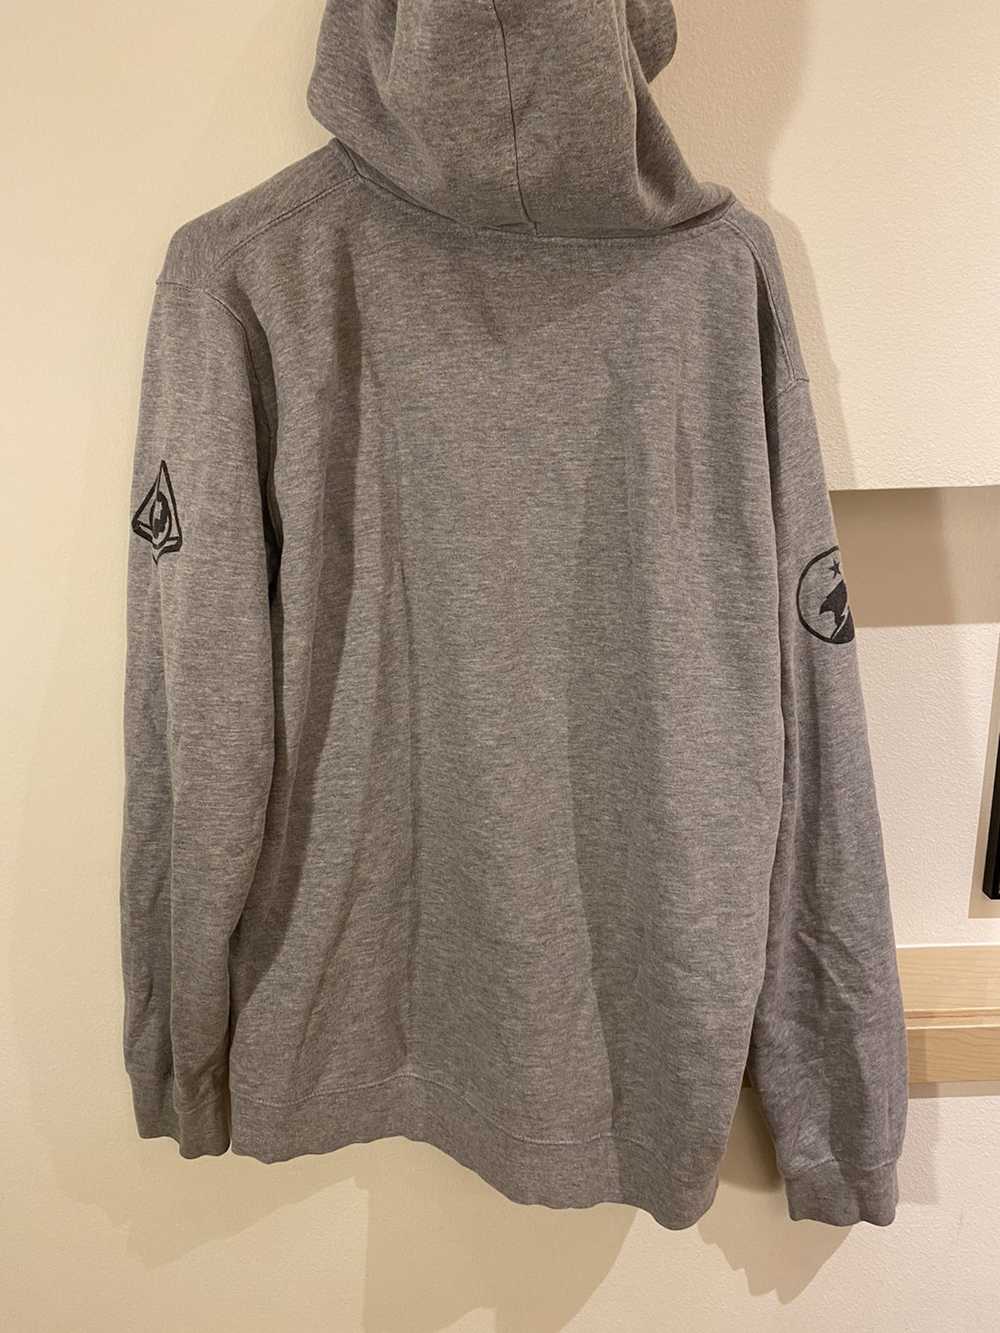 Halo × Undefeated Grey Undefeated Halo 5 Hoodie XL - image 2